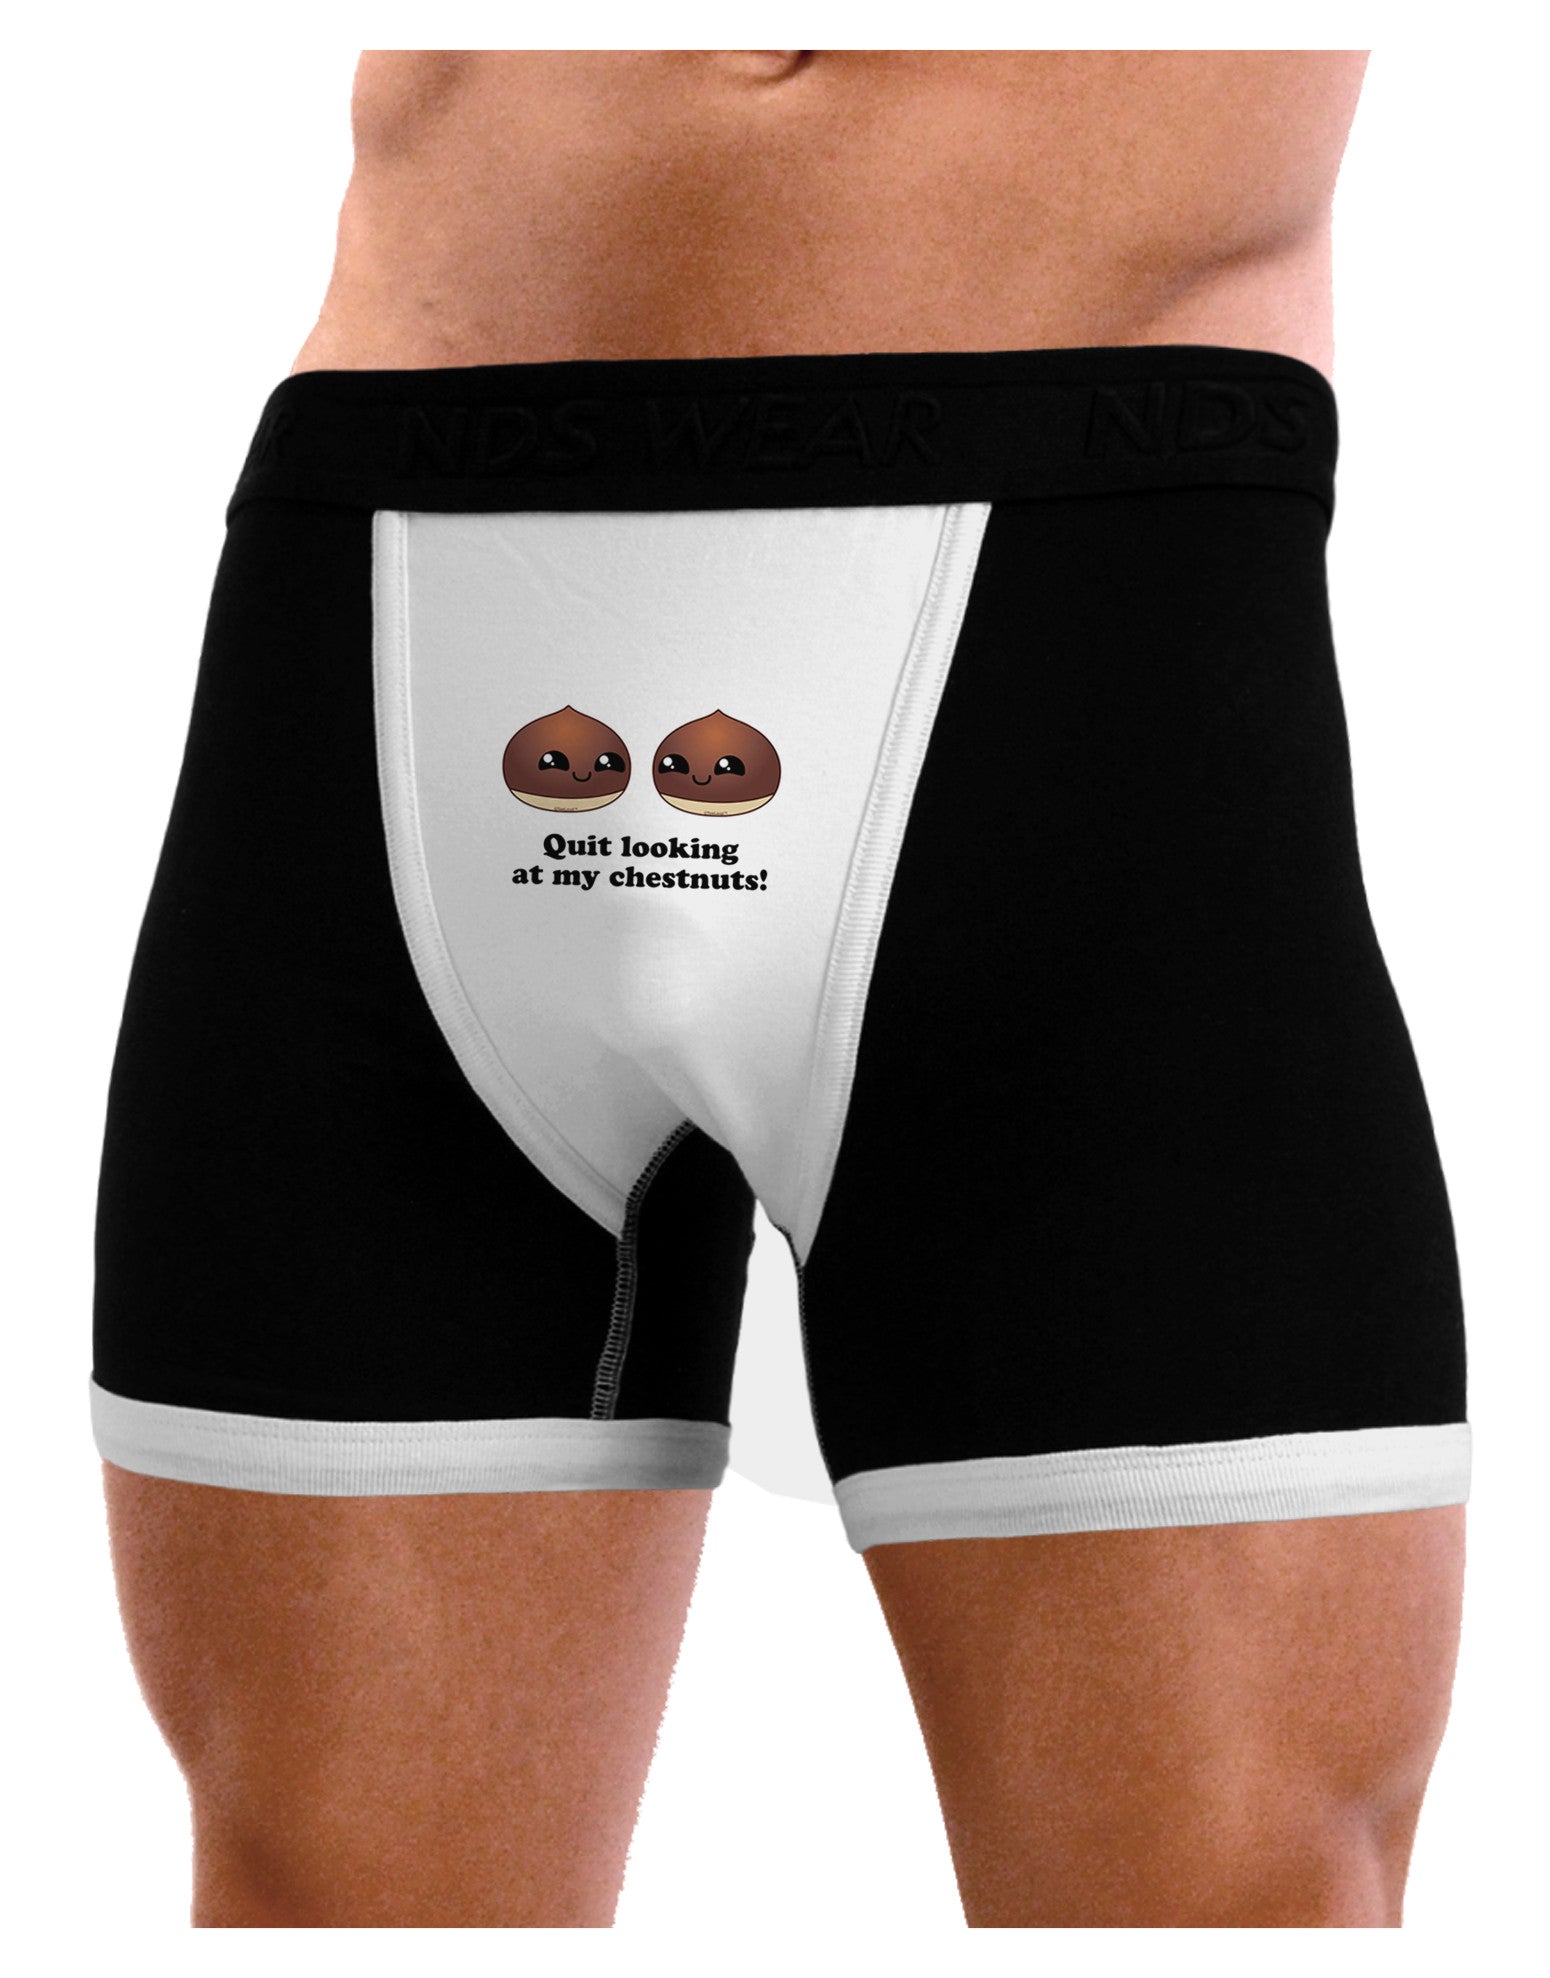 Quit Looking At My Chestnuts - Funny Mens NDS Wear Boxer Brief